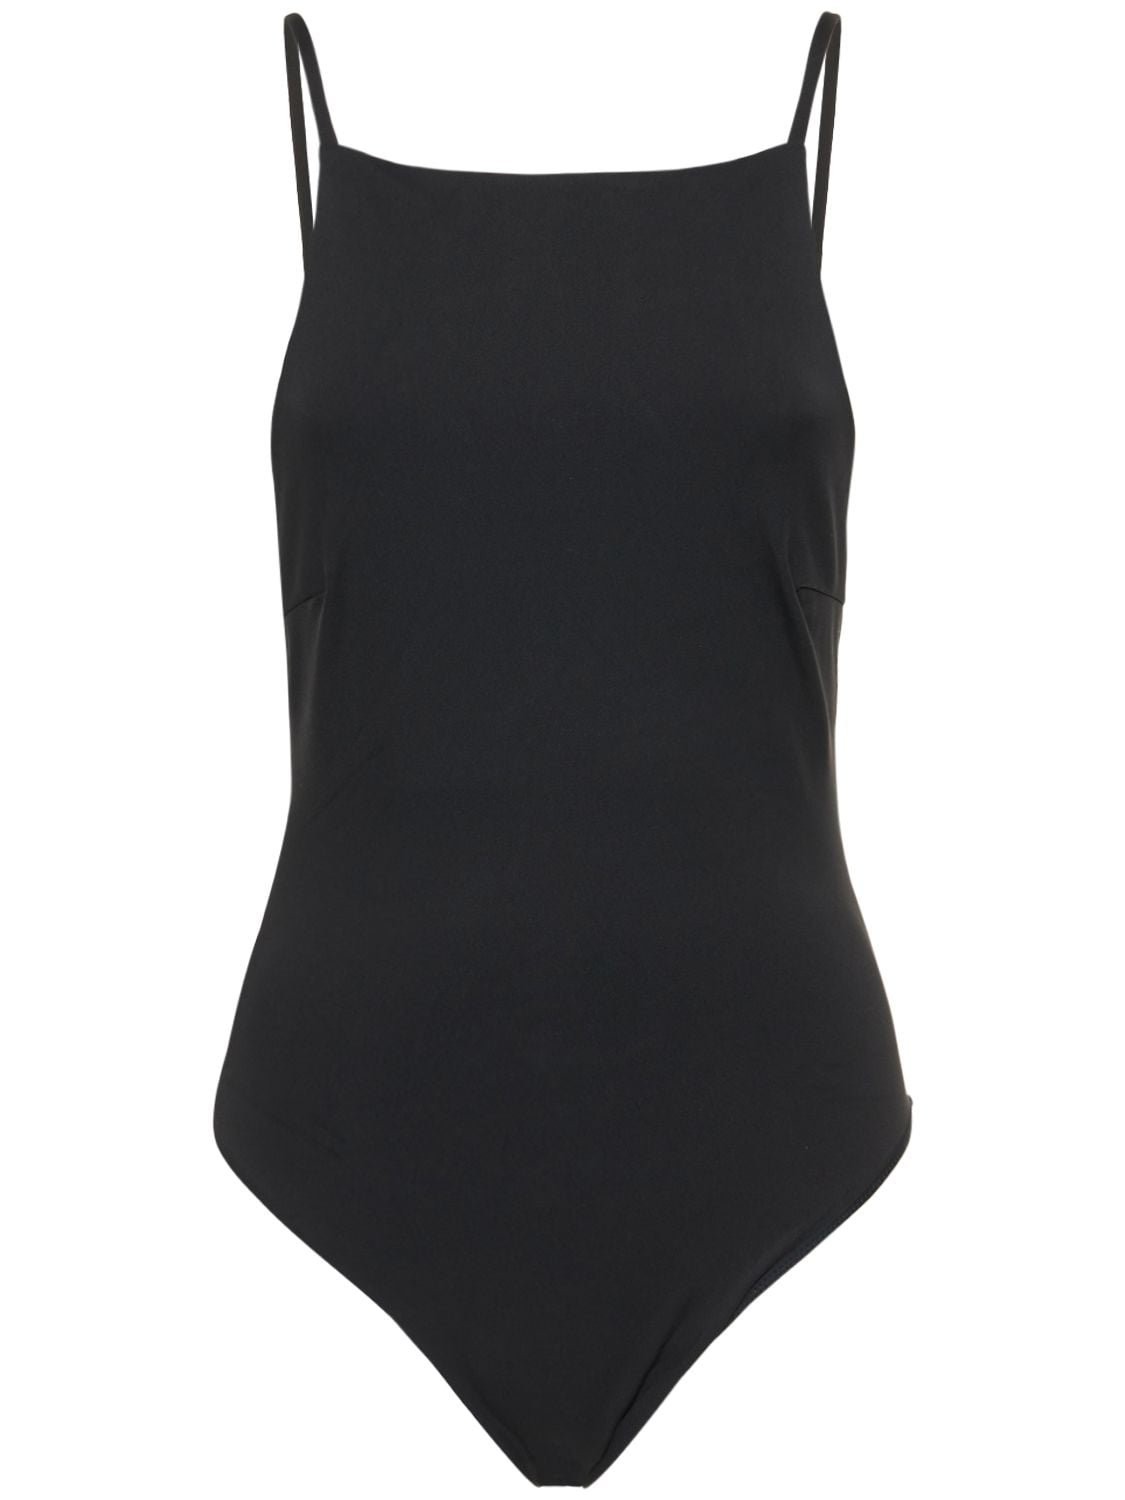 ZIAH SQUARE NECK ONE PIECE SWIMSUIT